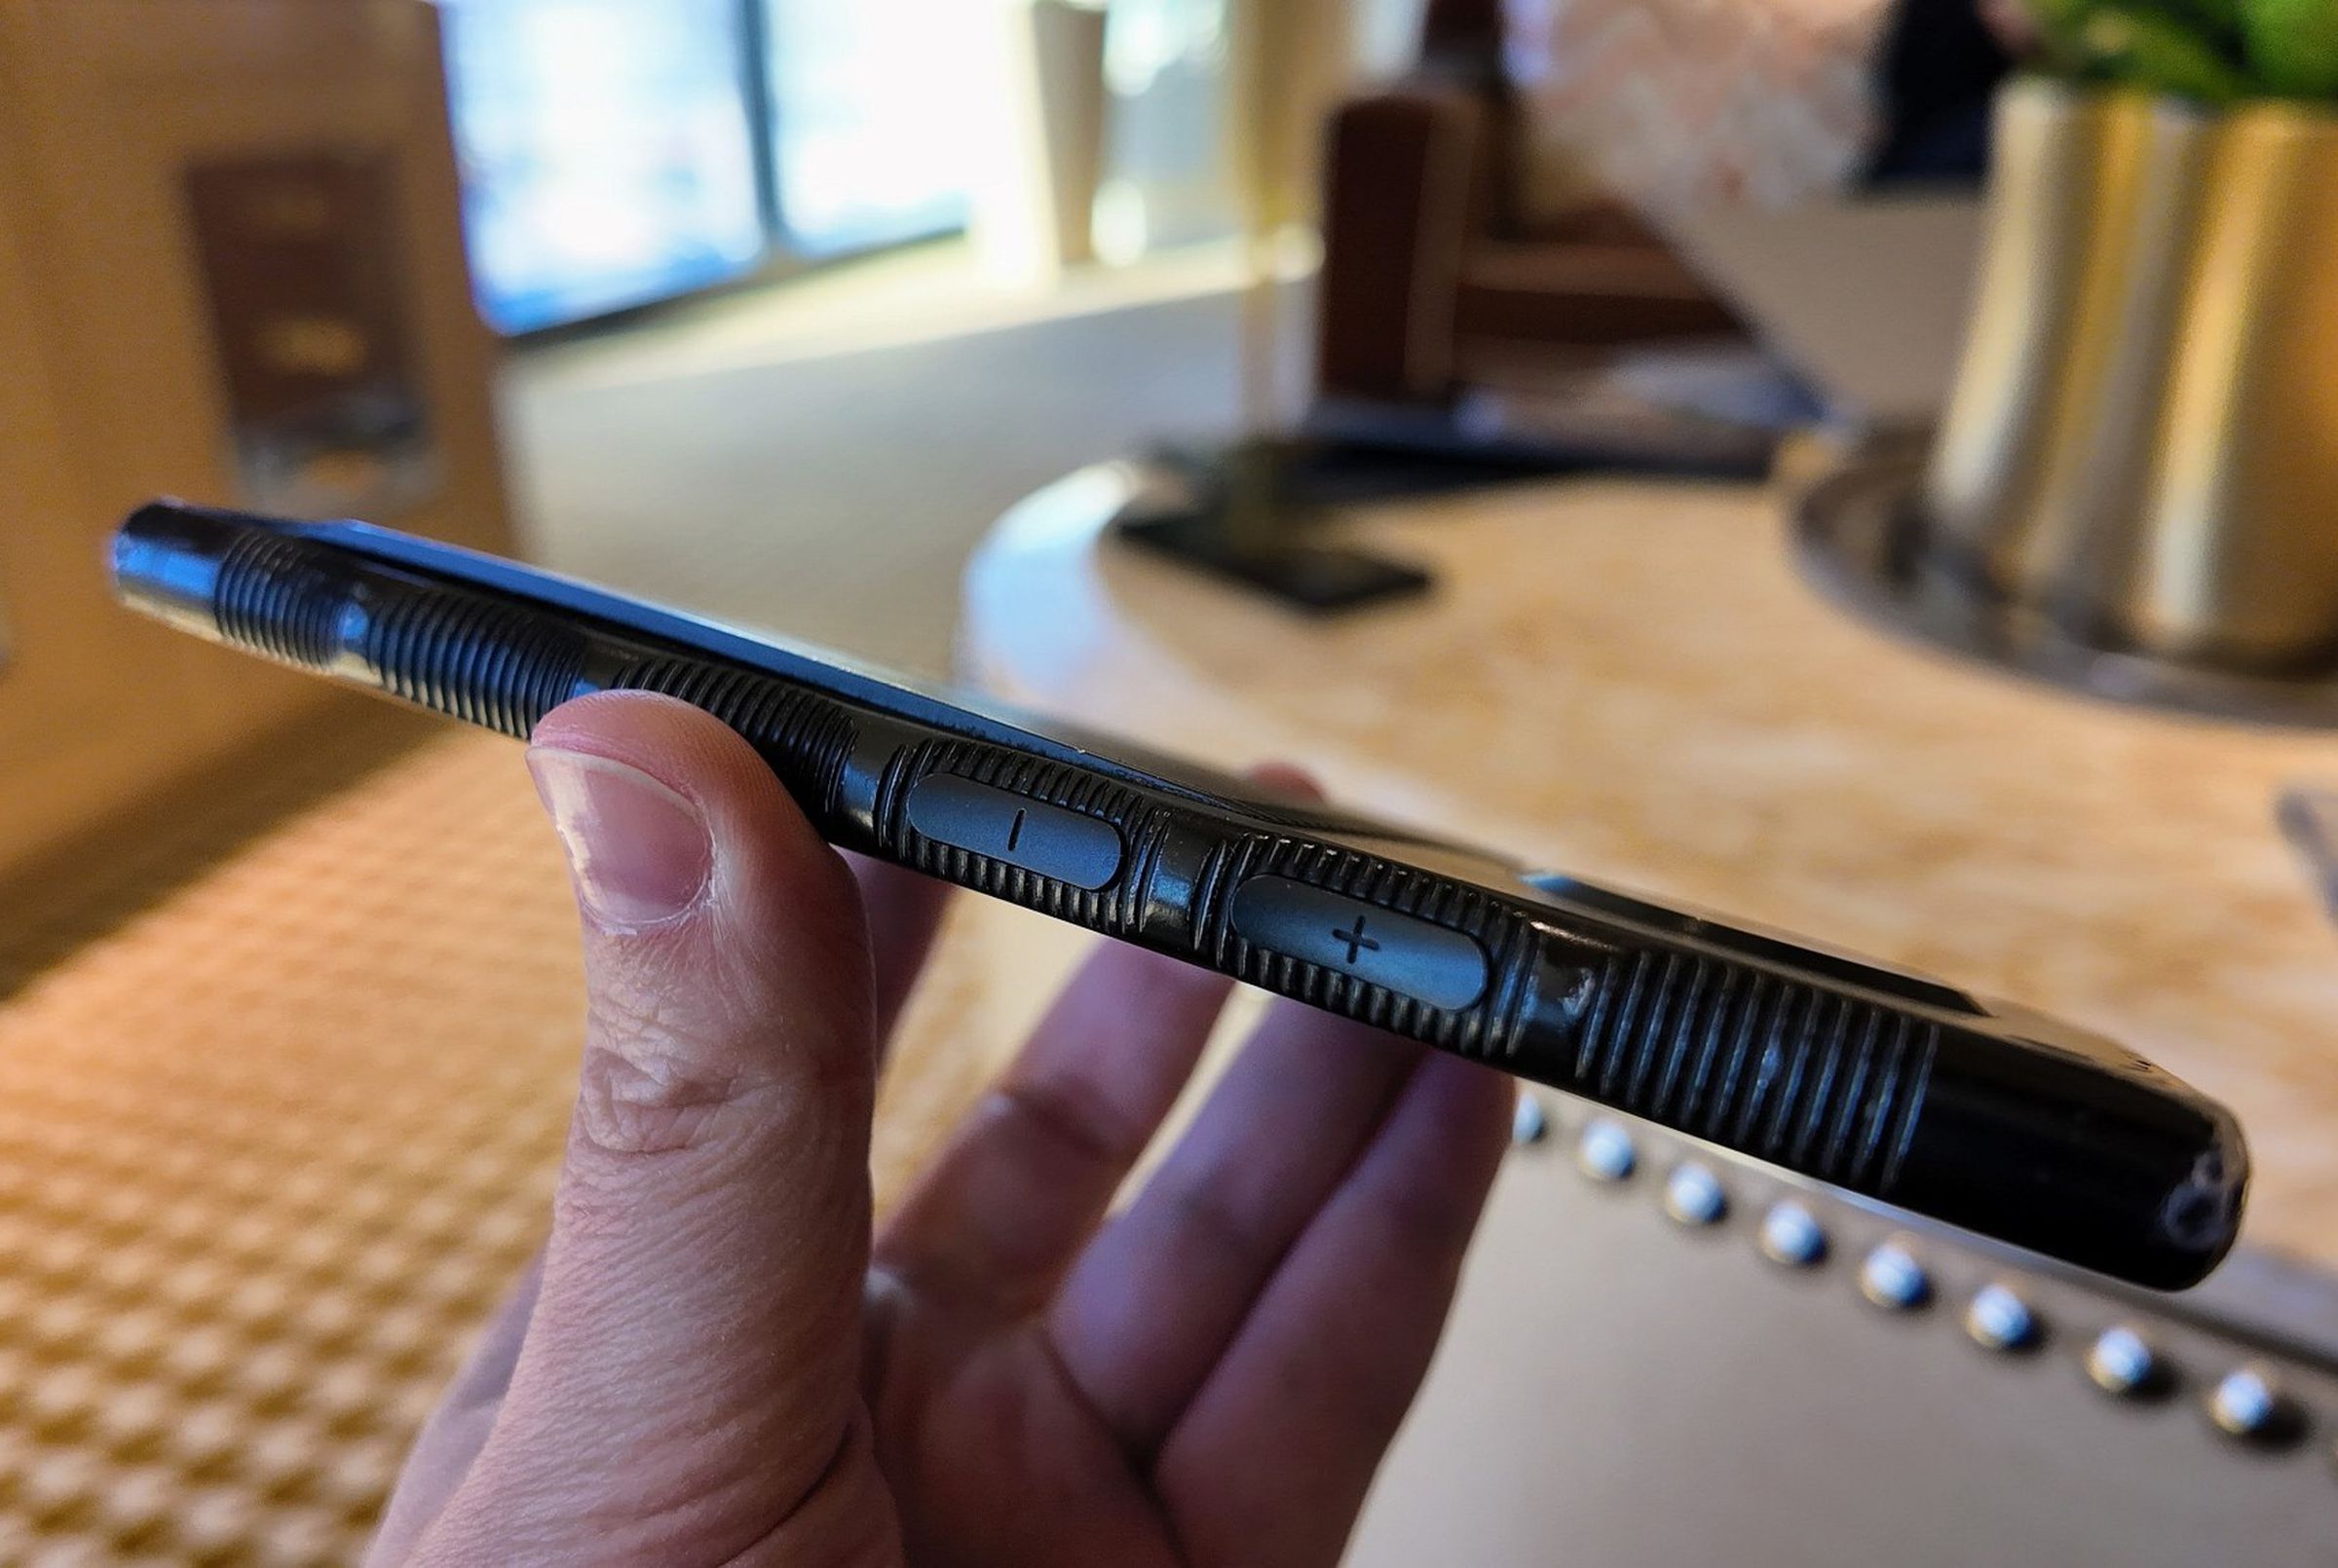 The back panel of his Red Hydrogen phone can be seen curving upward away from the main chassis in profile. You can also see the phone’s distinctive scalloped edges, each scallop of which has ridges like a coin inside.